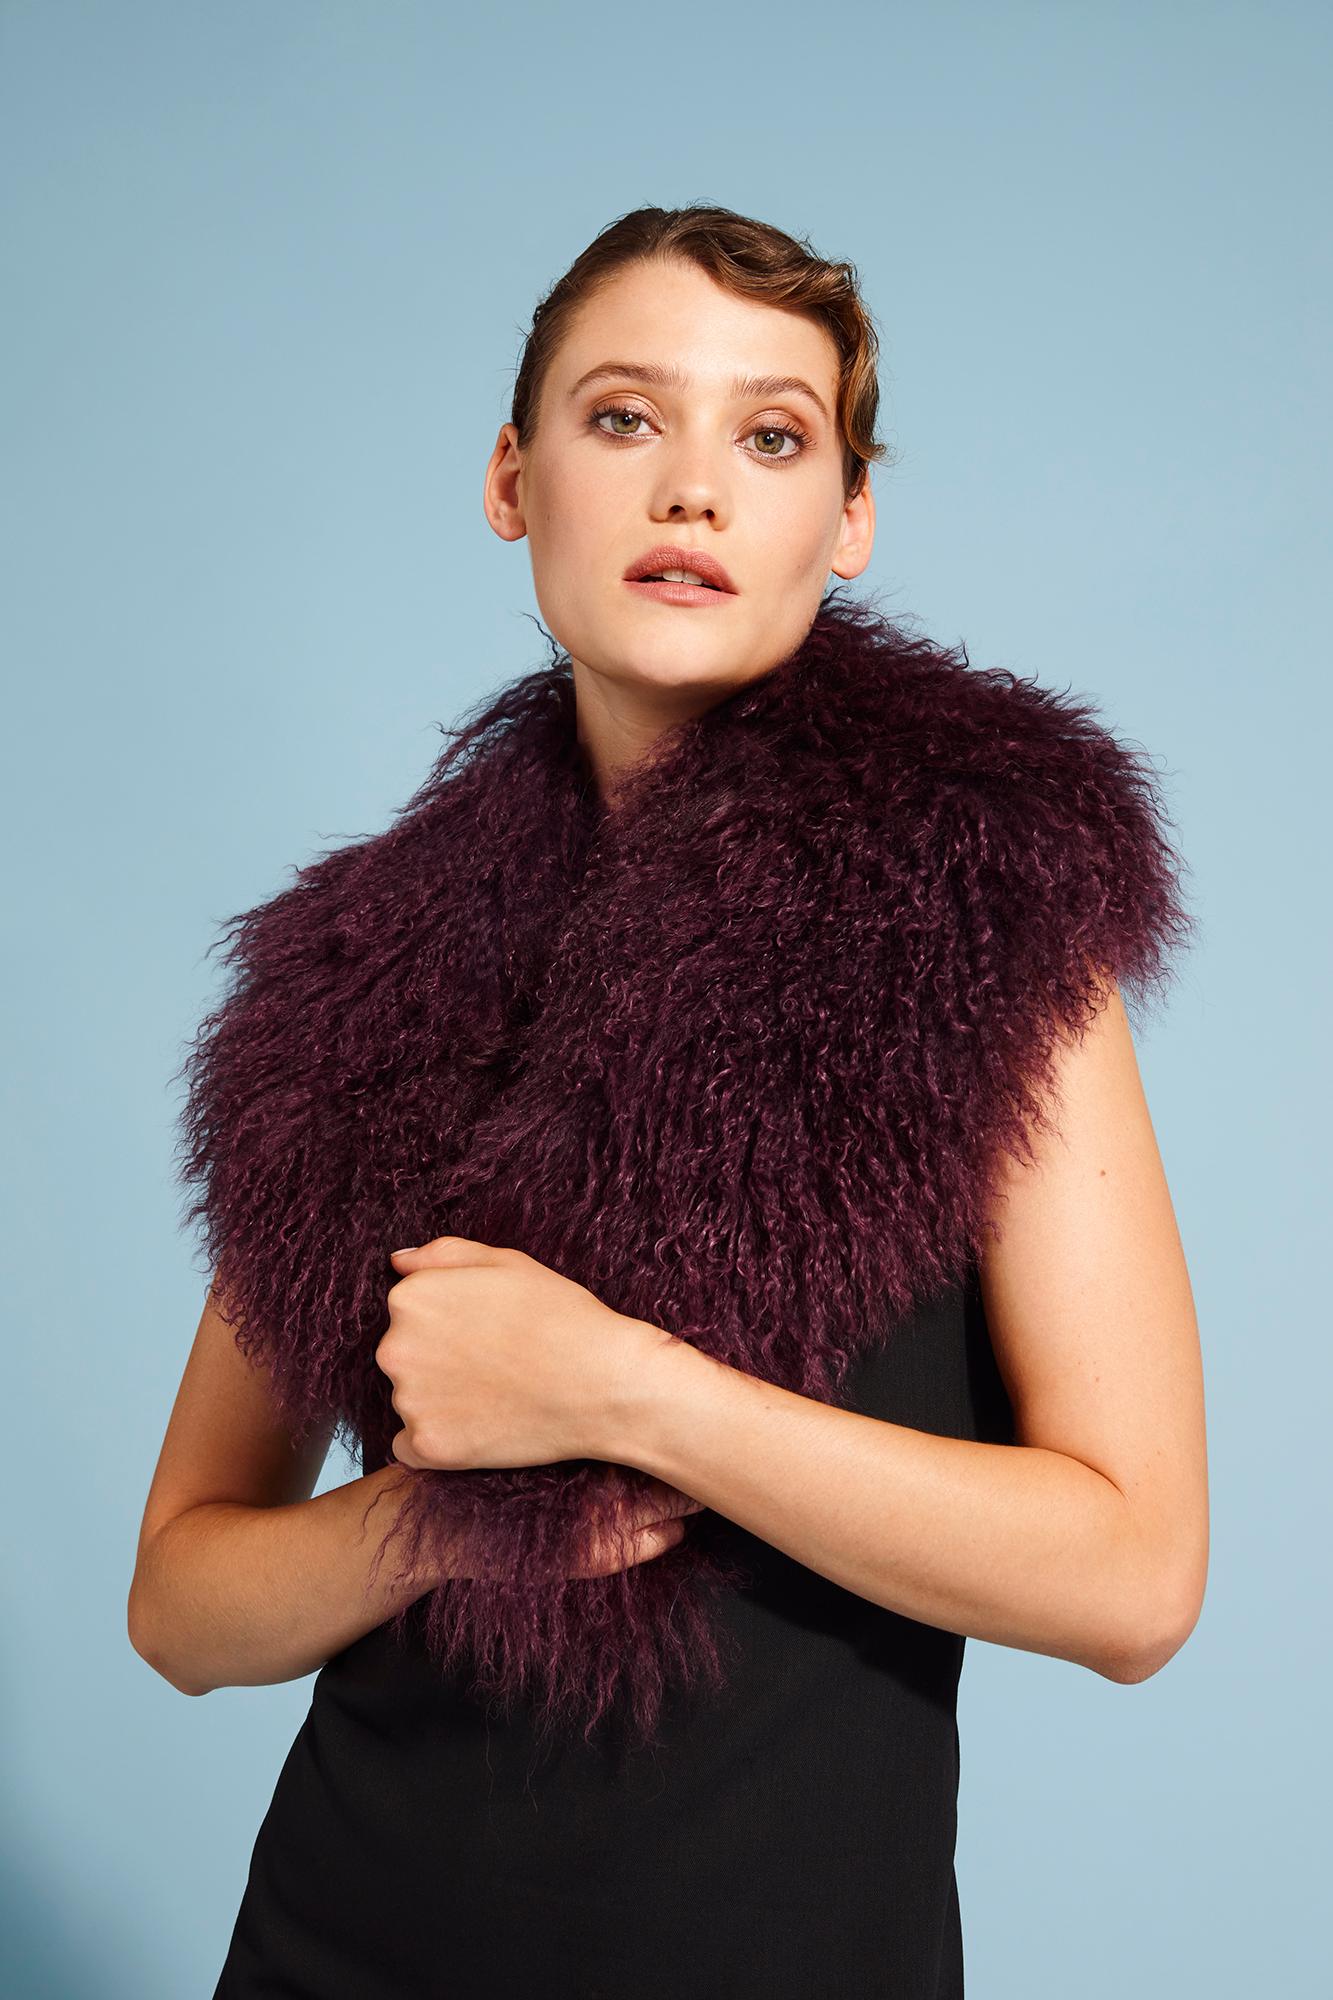 Verheyen London Shawl Collar in Garnet Mongolian Lamb Fur - Brand New

Featured in Tatler - this is the perfect Valentines gift with the option for monogramming on request, this Shawl Collar is Verheyen London’s casual everyday design, which is